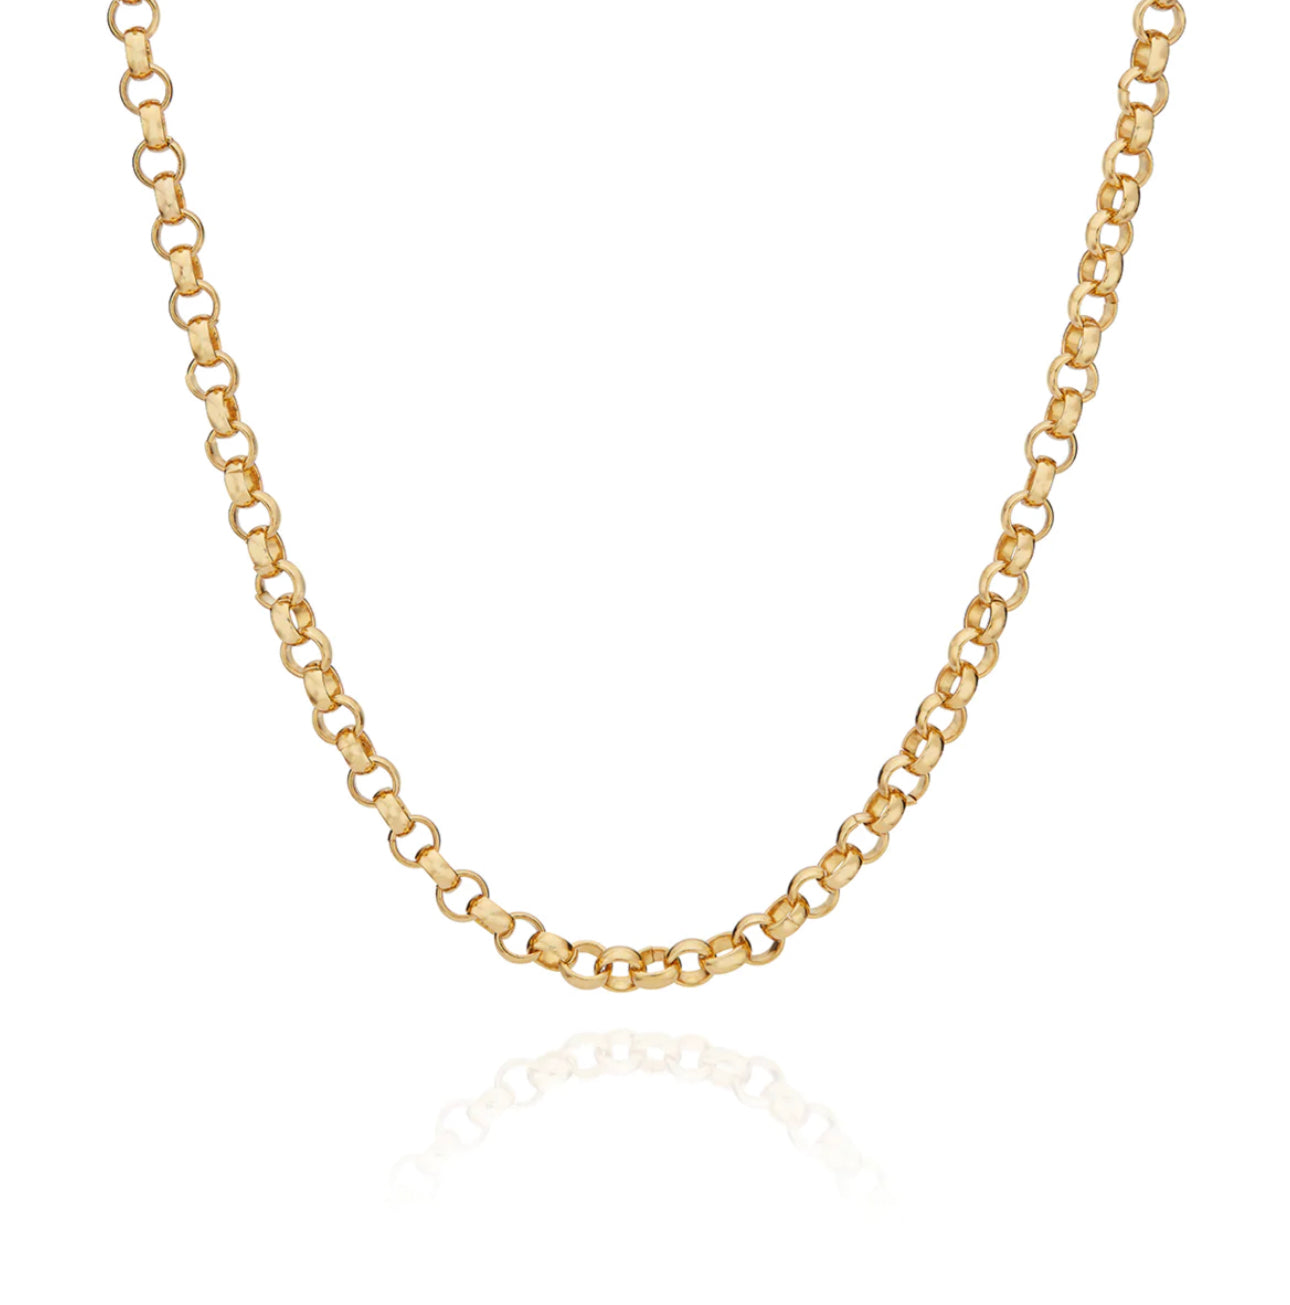 Rolo Chain Necklace - 18"